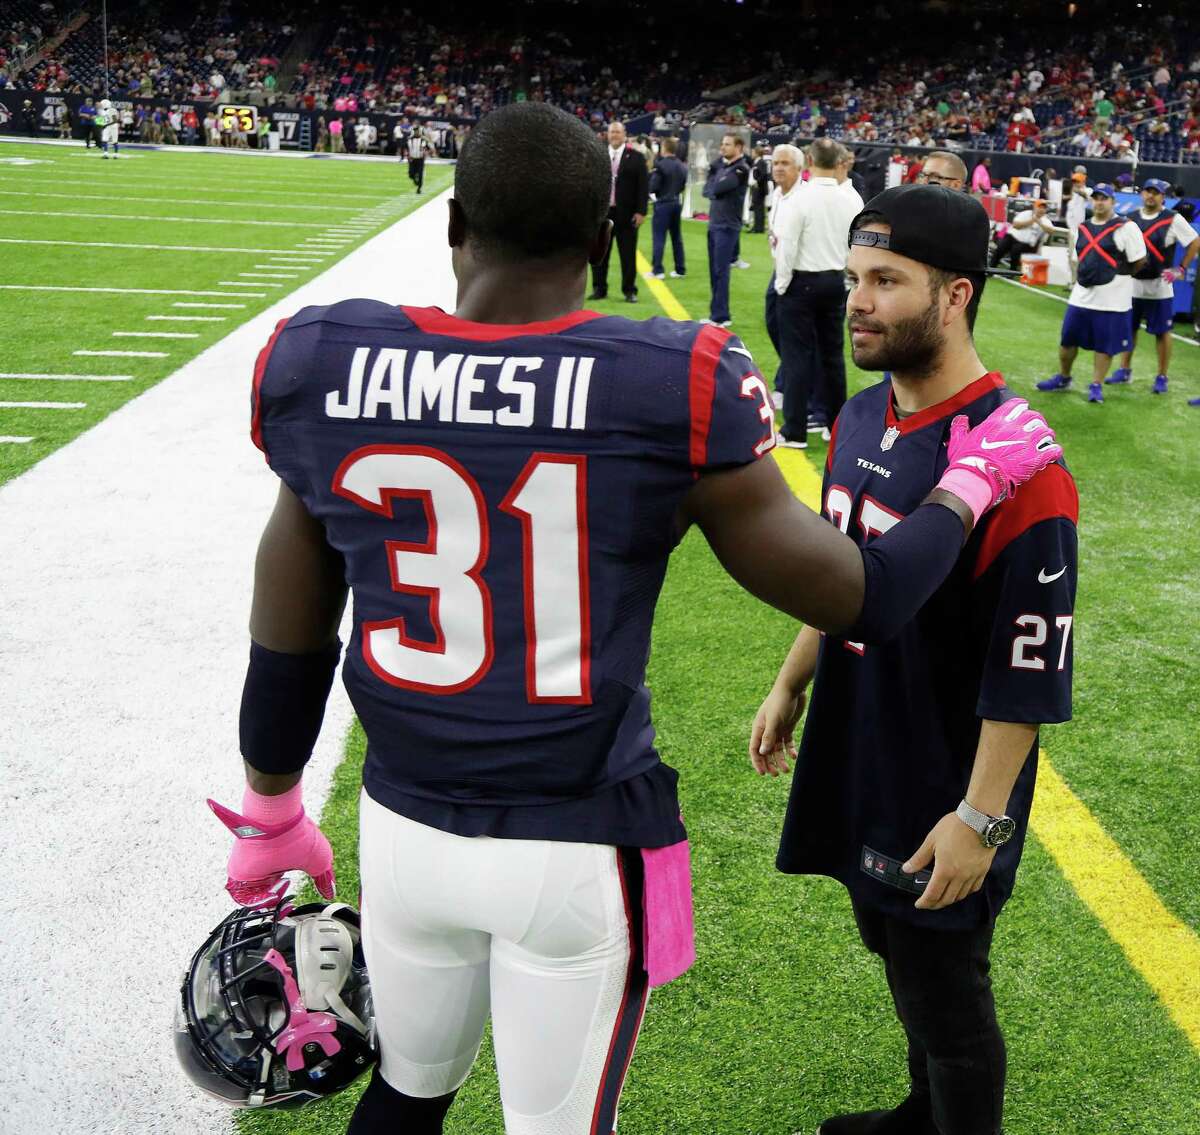 Houston Astros second baseman Jose Altuve chats with Texans defensive back Charles James (31) before the start of an NFL football game at NRG Stadium, Sunday,Oct. 16, 2016 in Houston.